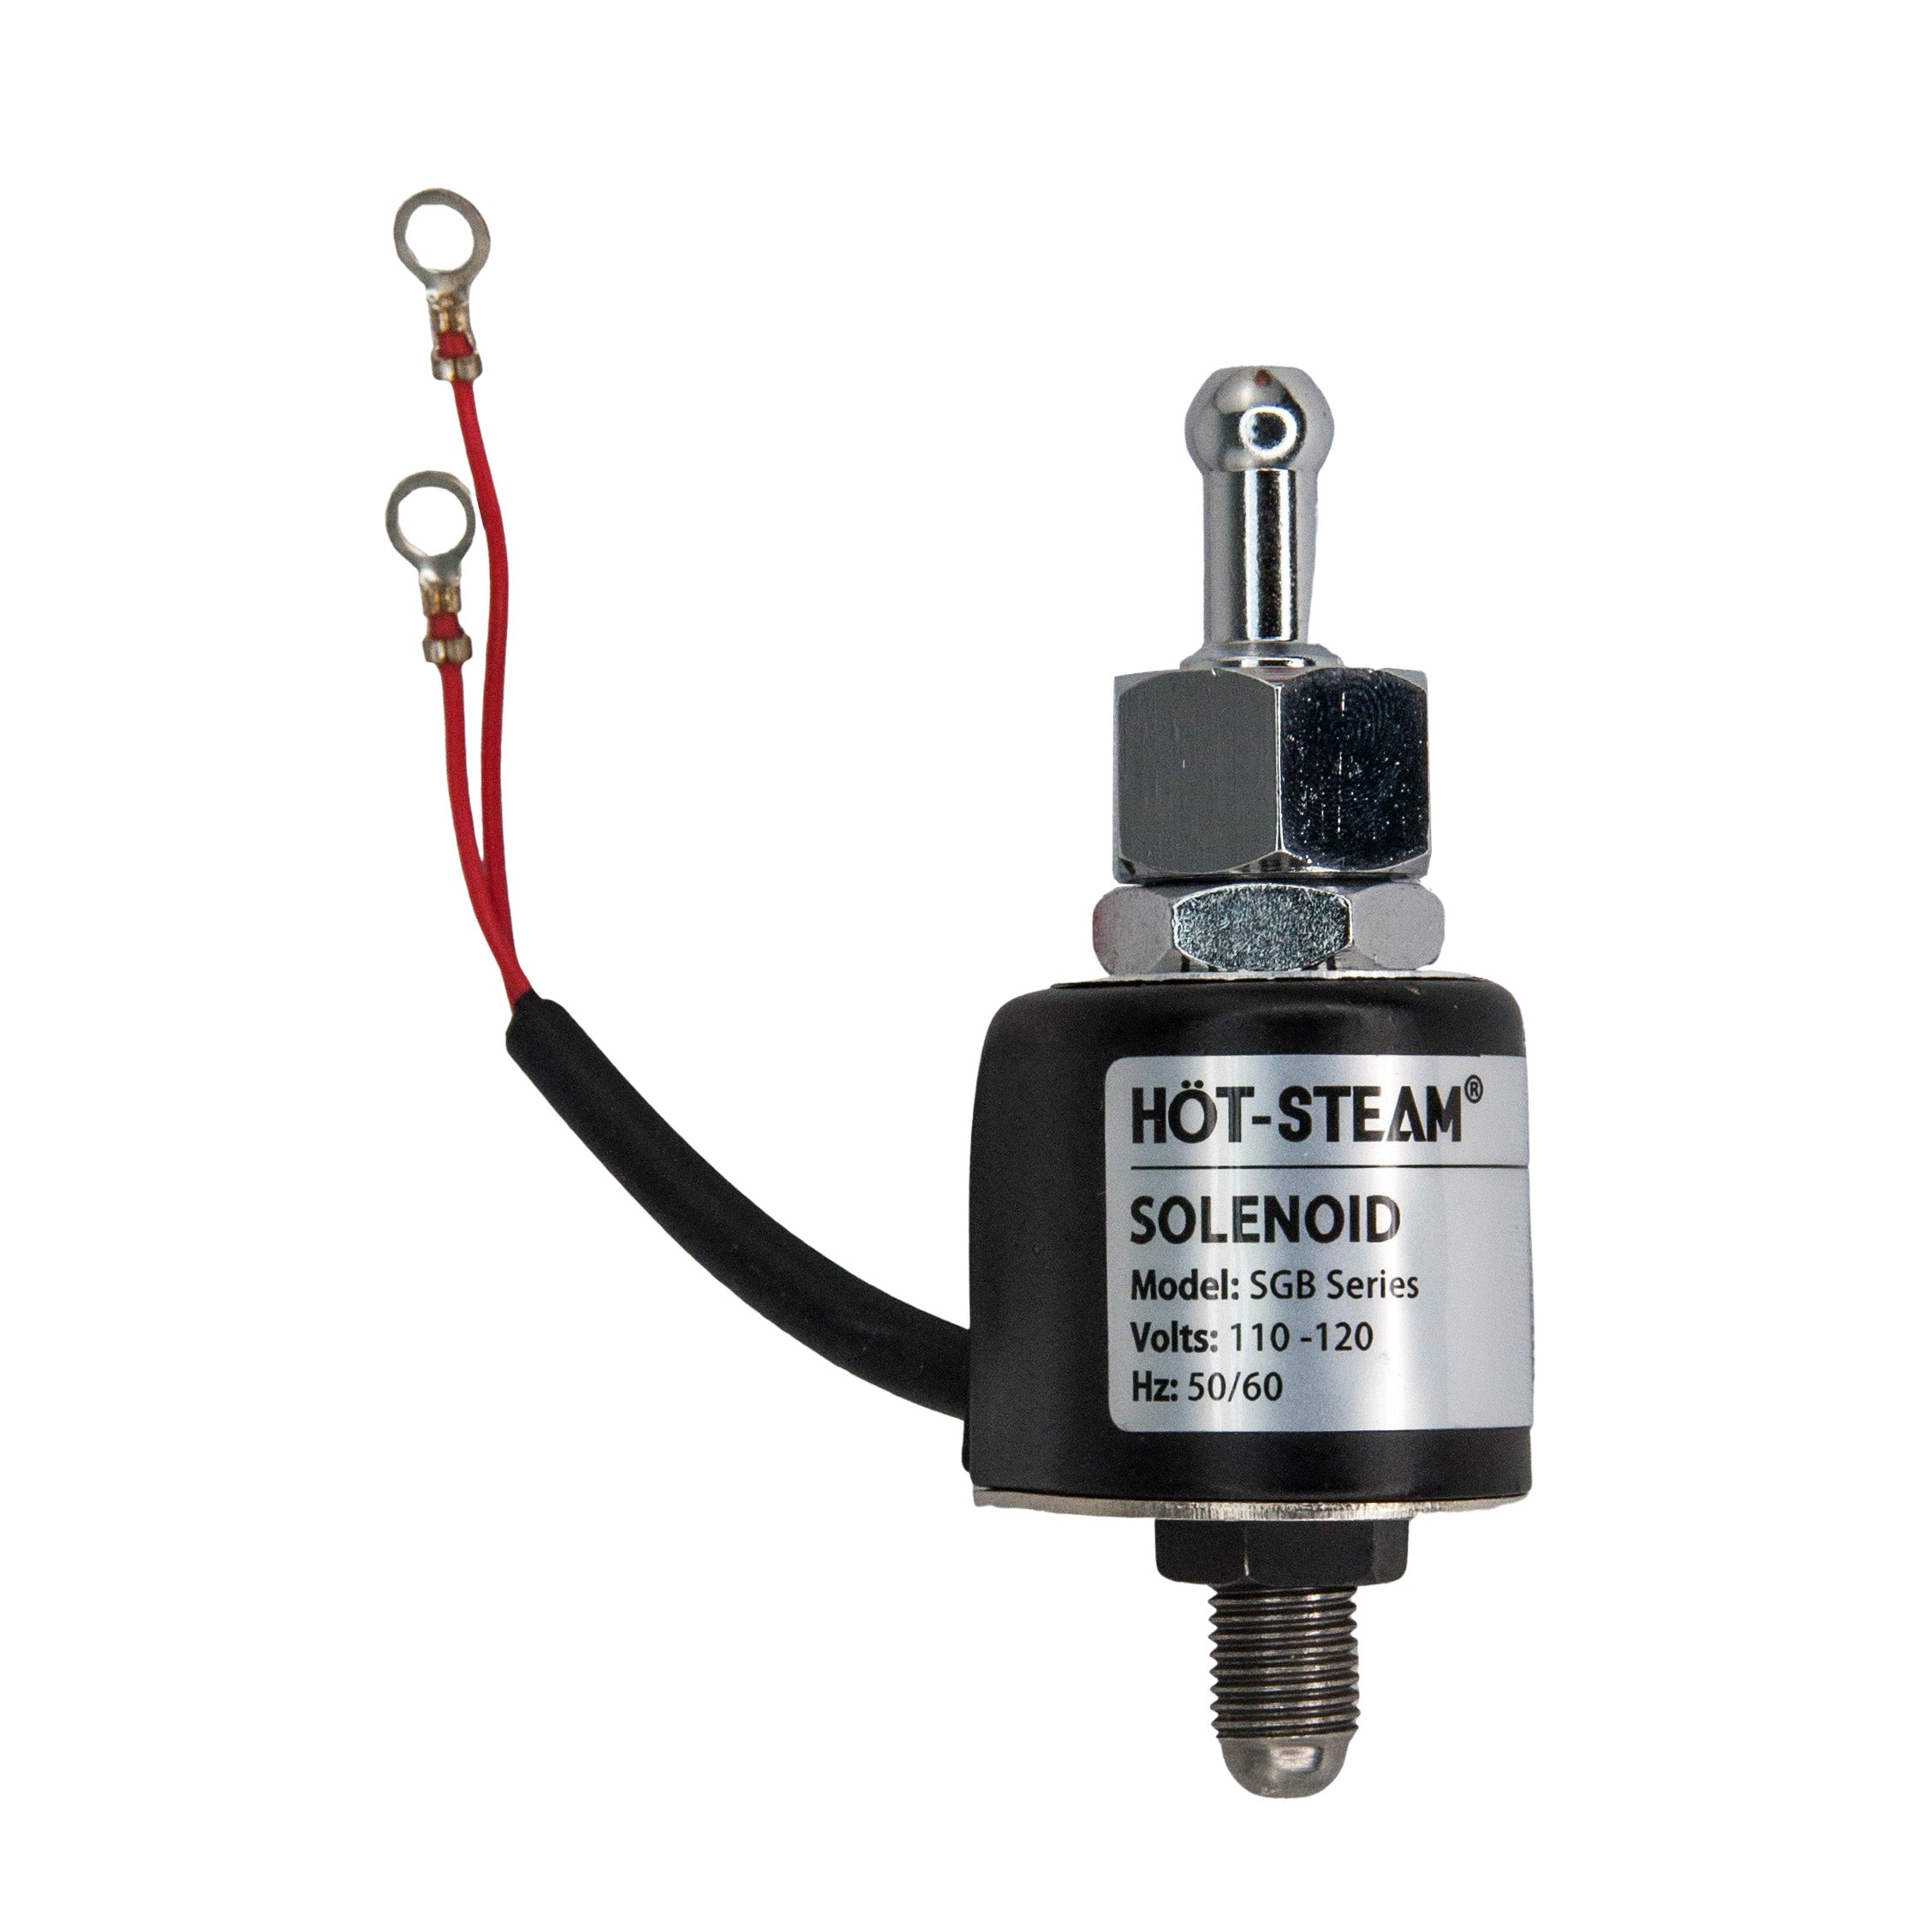 Hot-Steam® S6024 Solenoid Valve 703010 for SGB Gravity Fed Iron (Ref #